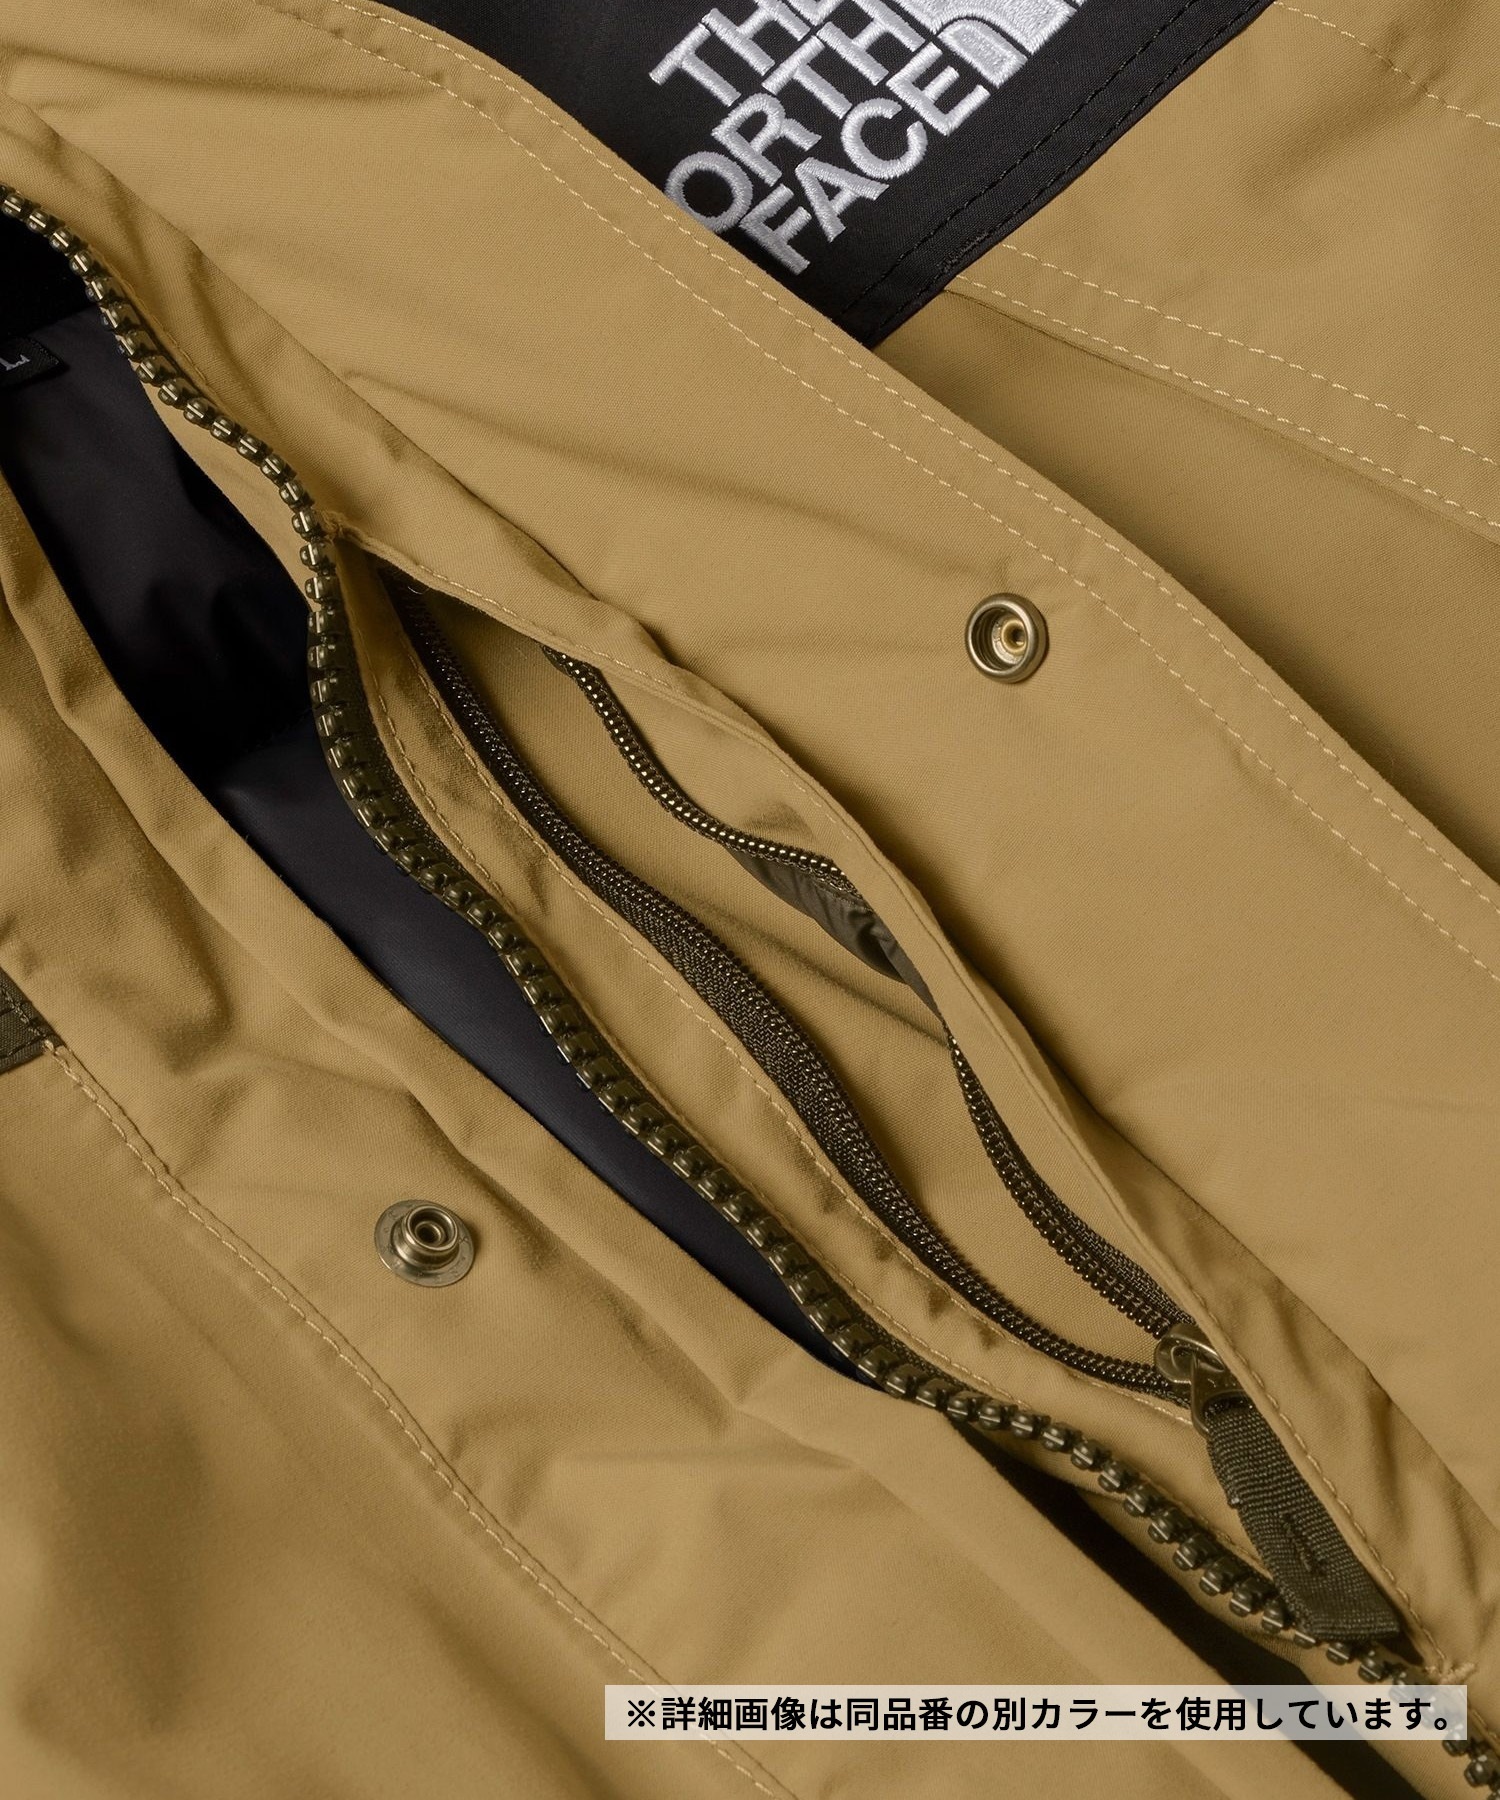 THE NORTH FACE/ザ・ノース・フェイス Mountain Down Jacket ...